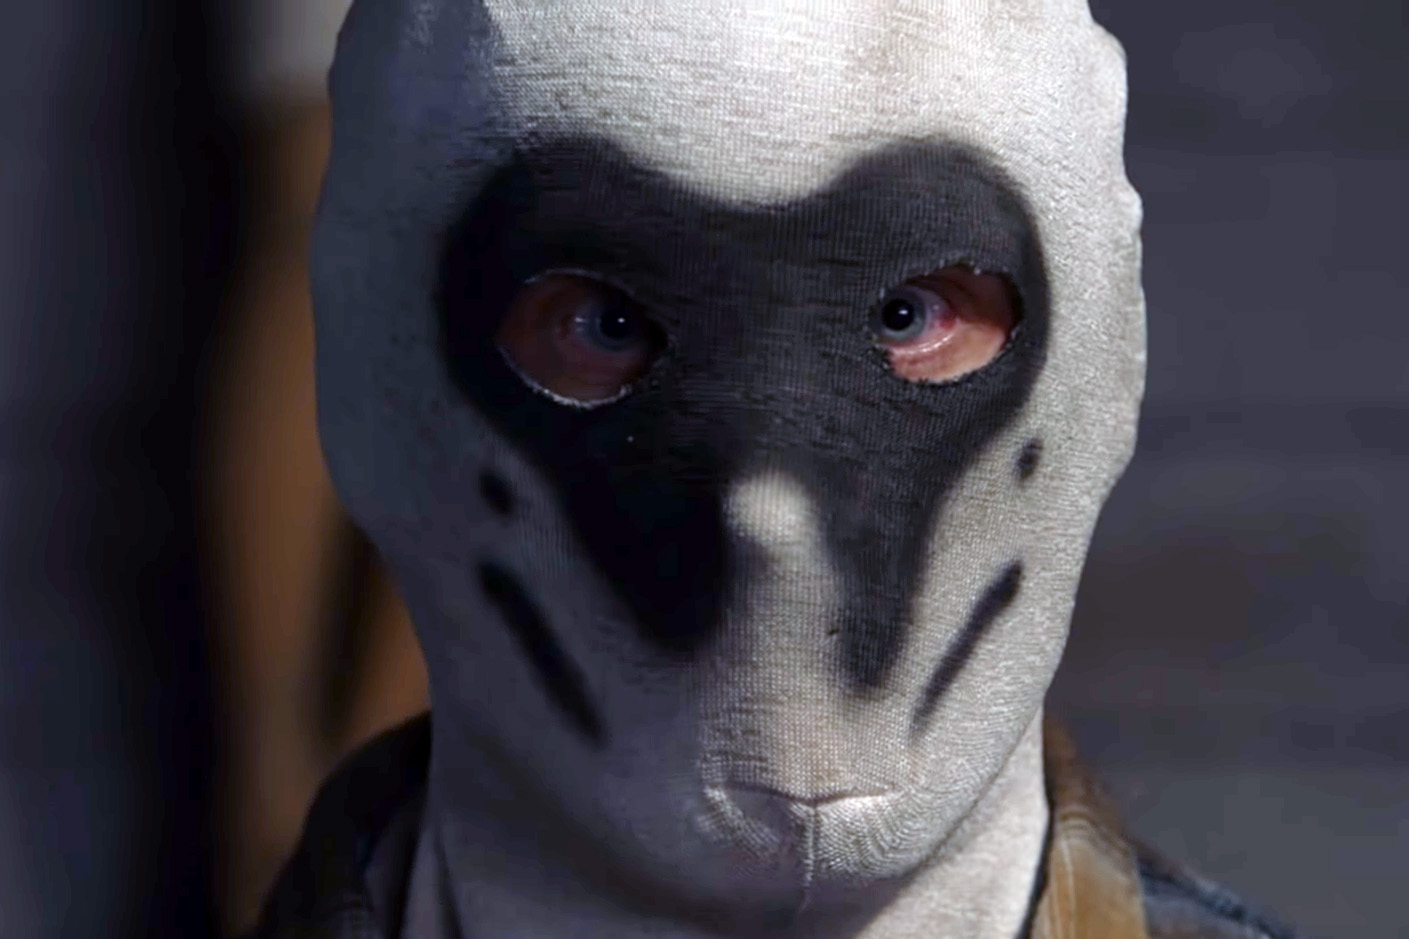 A man in a Rorschach mask in HBO's "Watchmen."